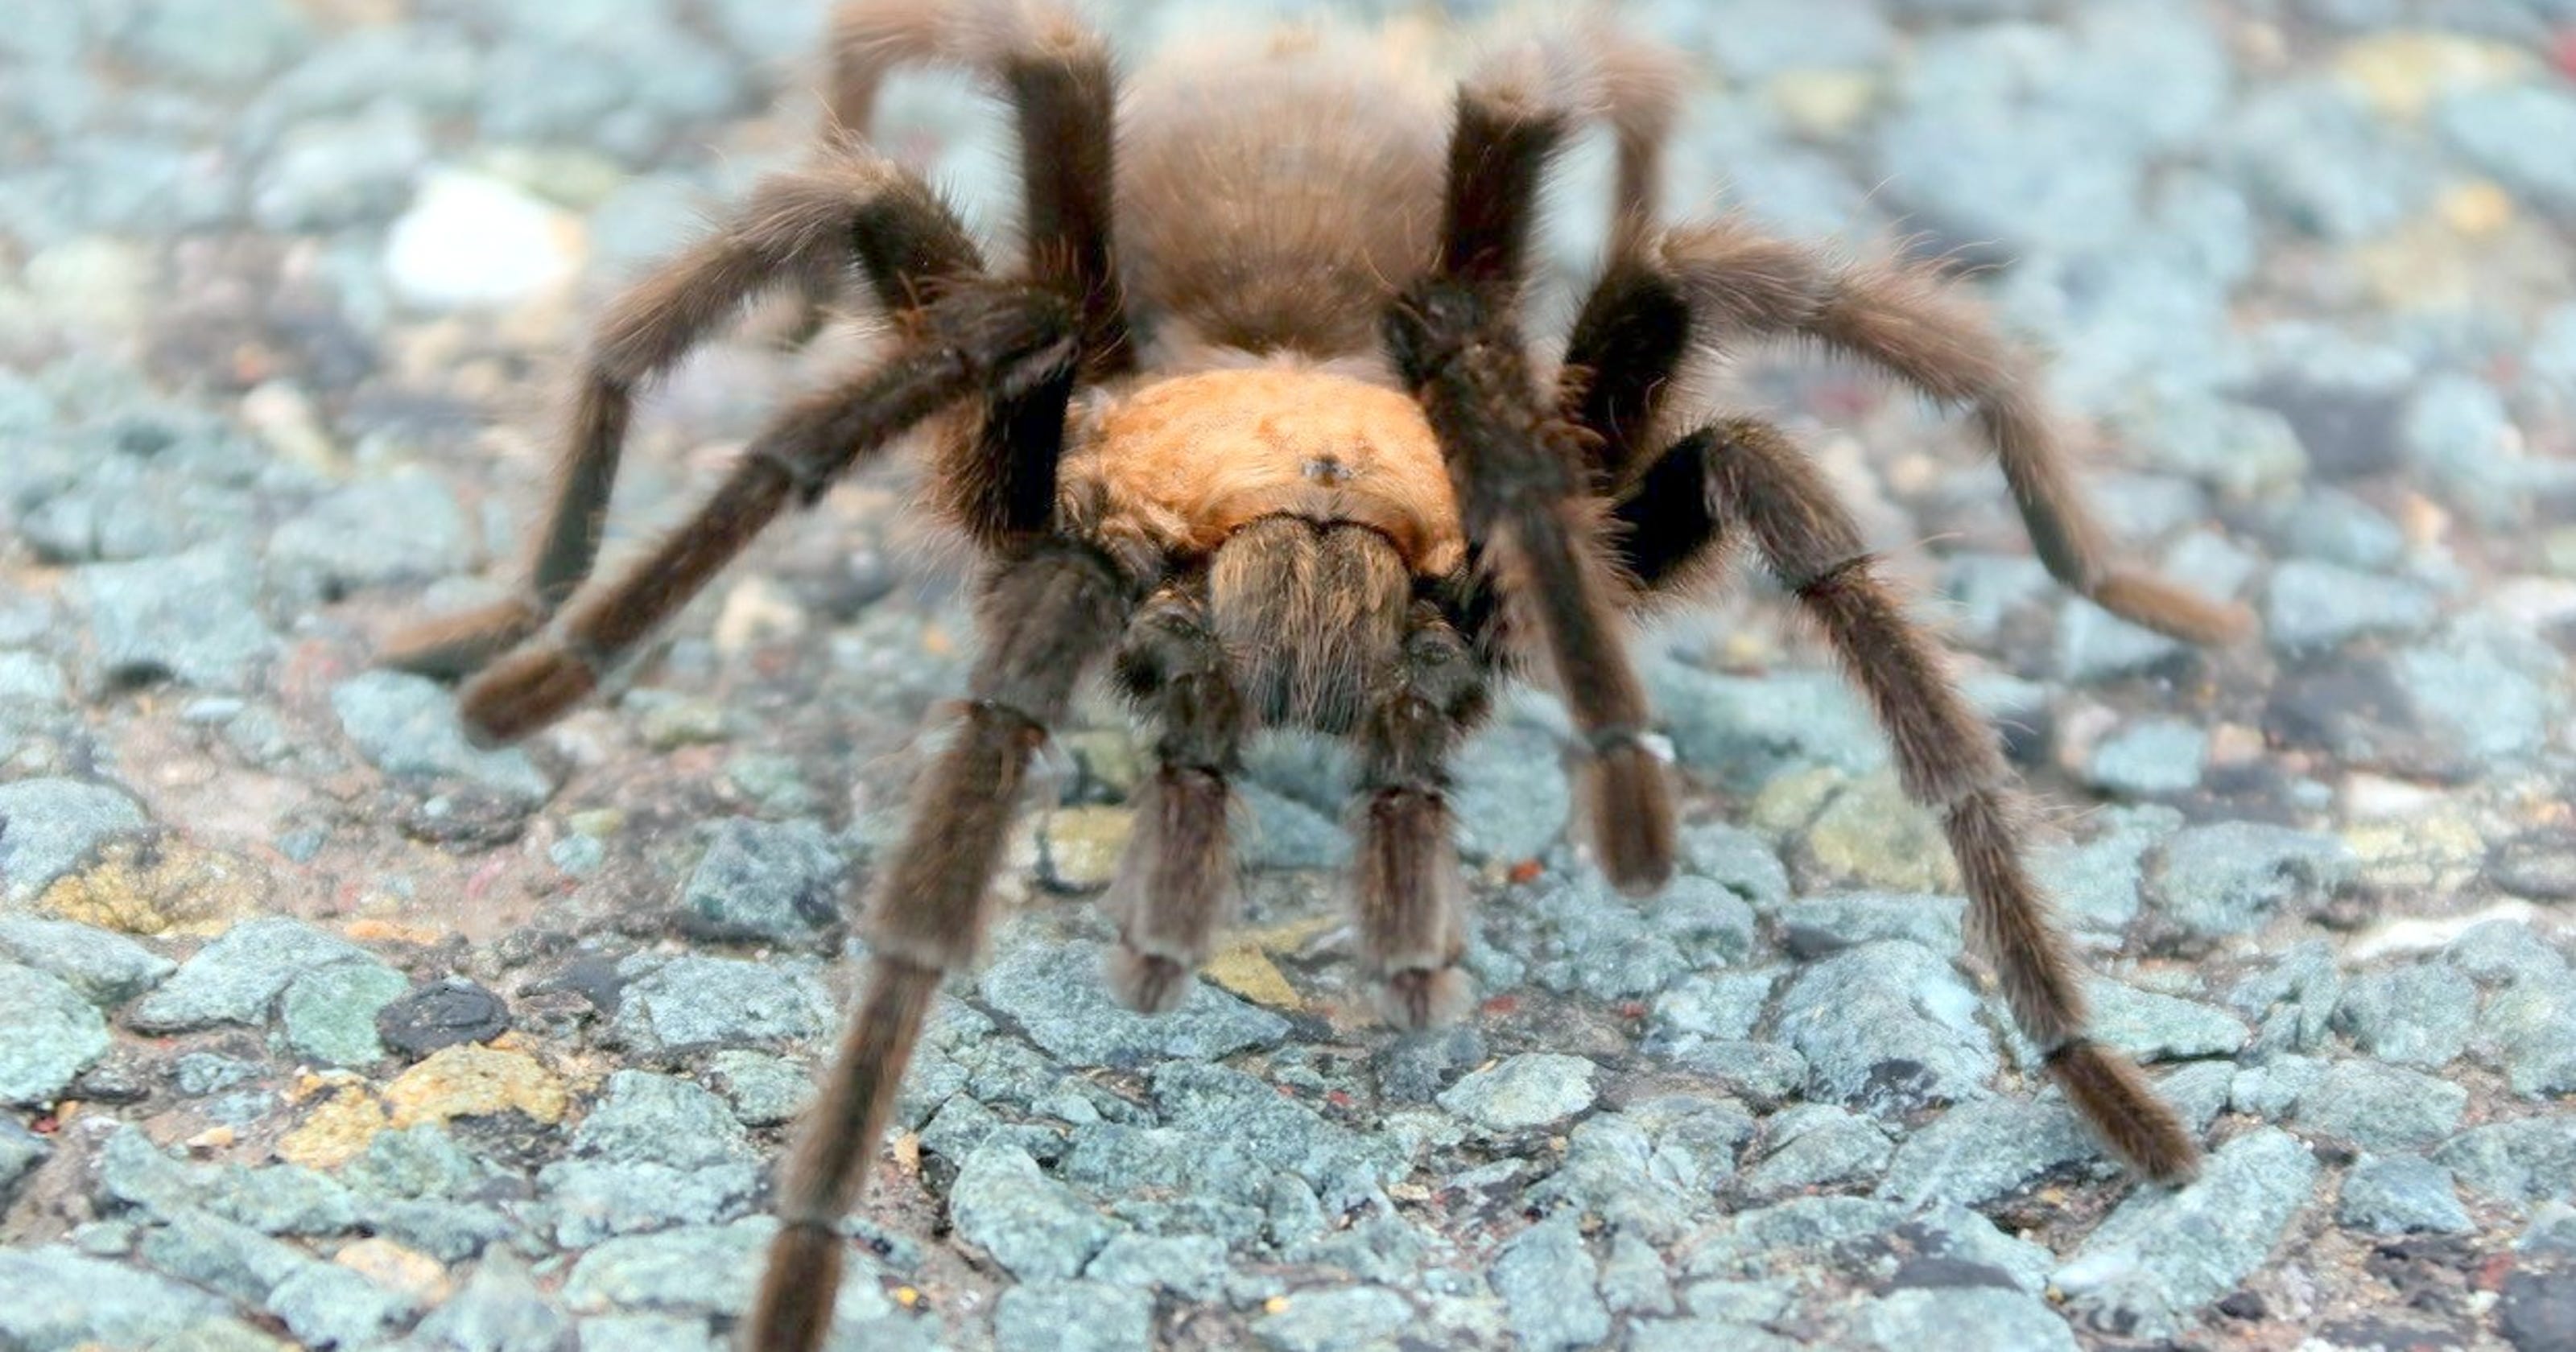 The Annual Fall March Of Amorous Male Tarantulas Is Underway 